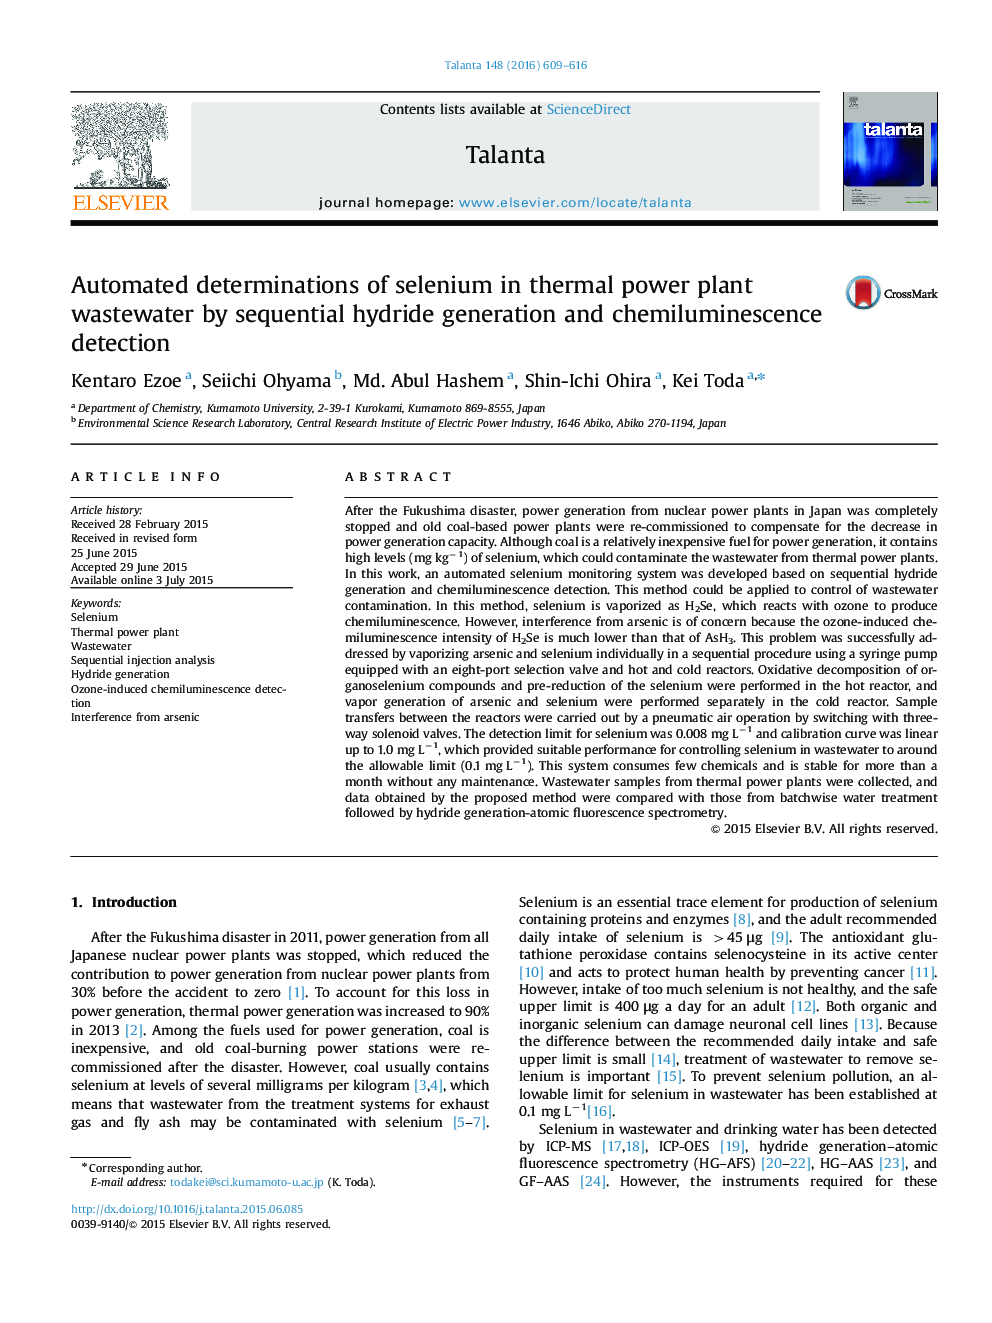 Automated determinations of selenium in thermal power plant wastewater by sequential hydride generation and chemiluminescence detection